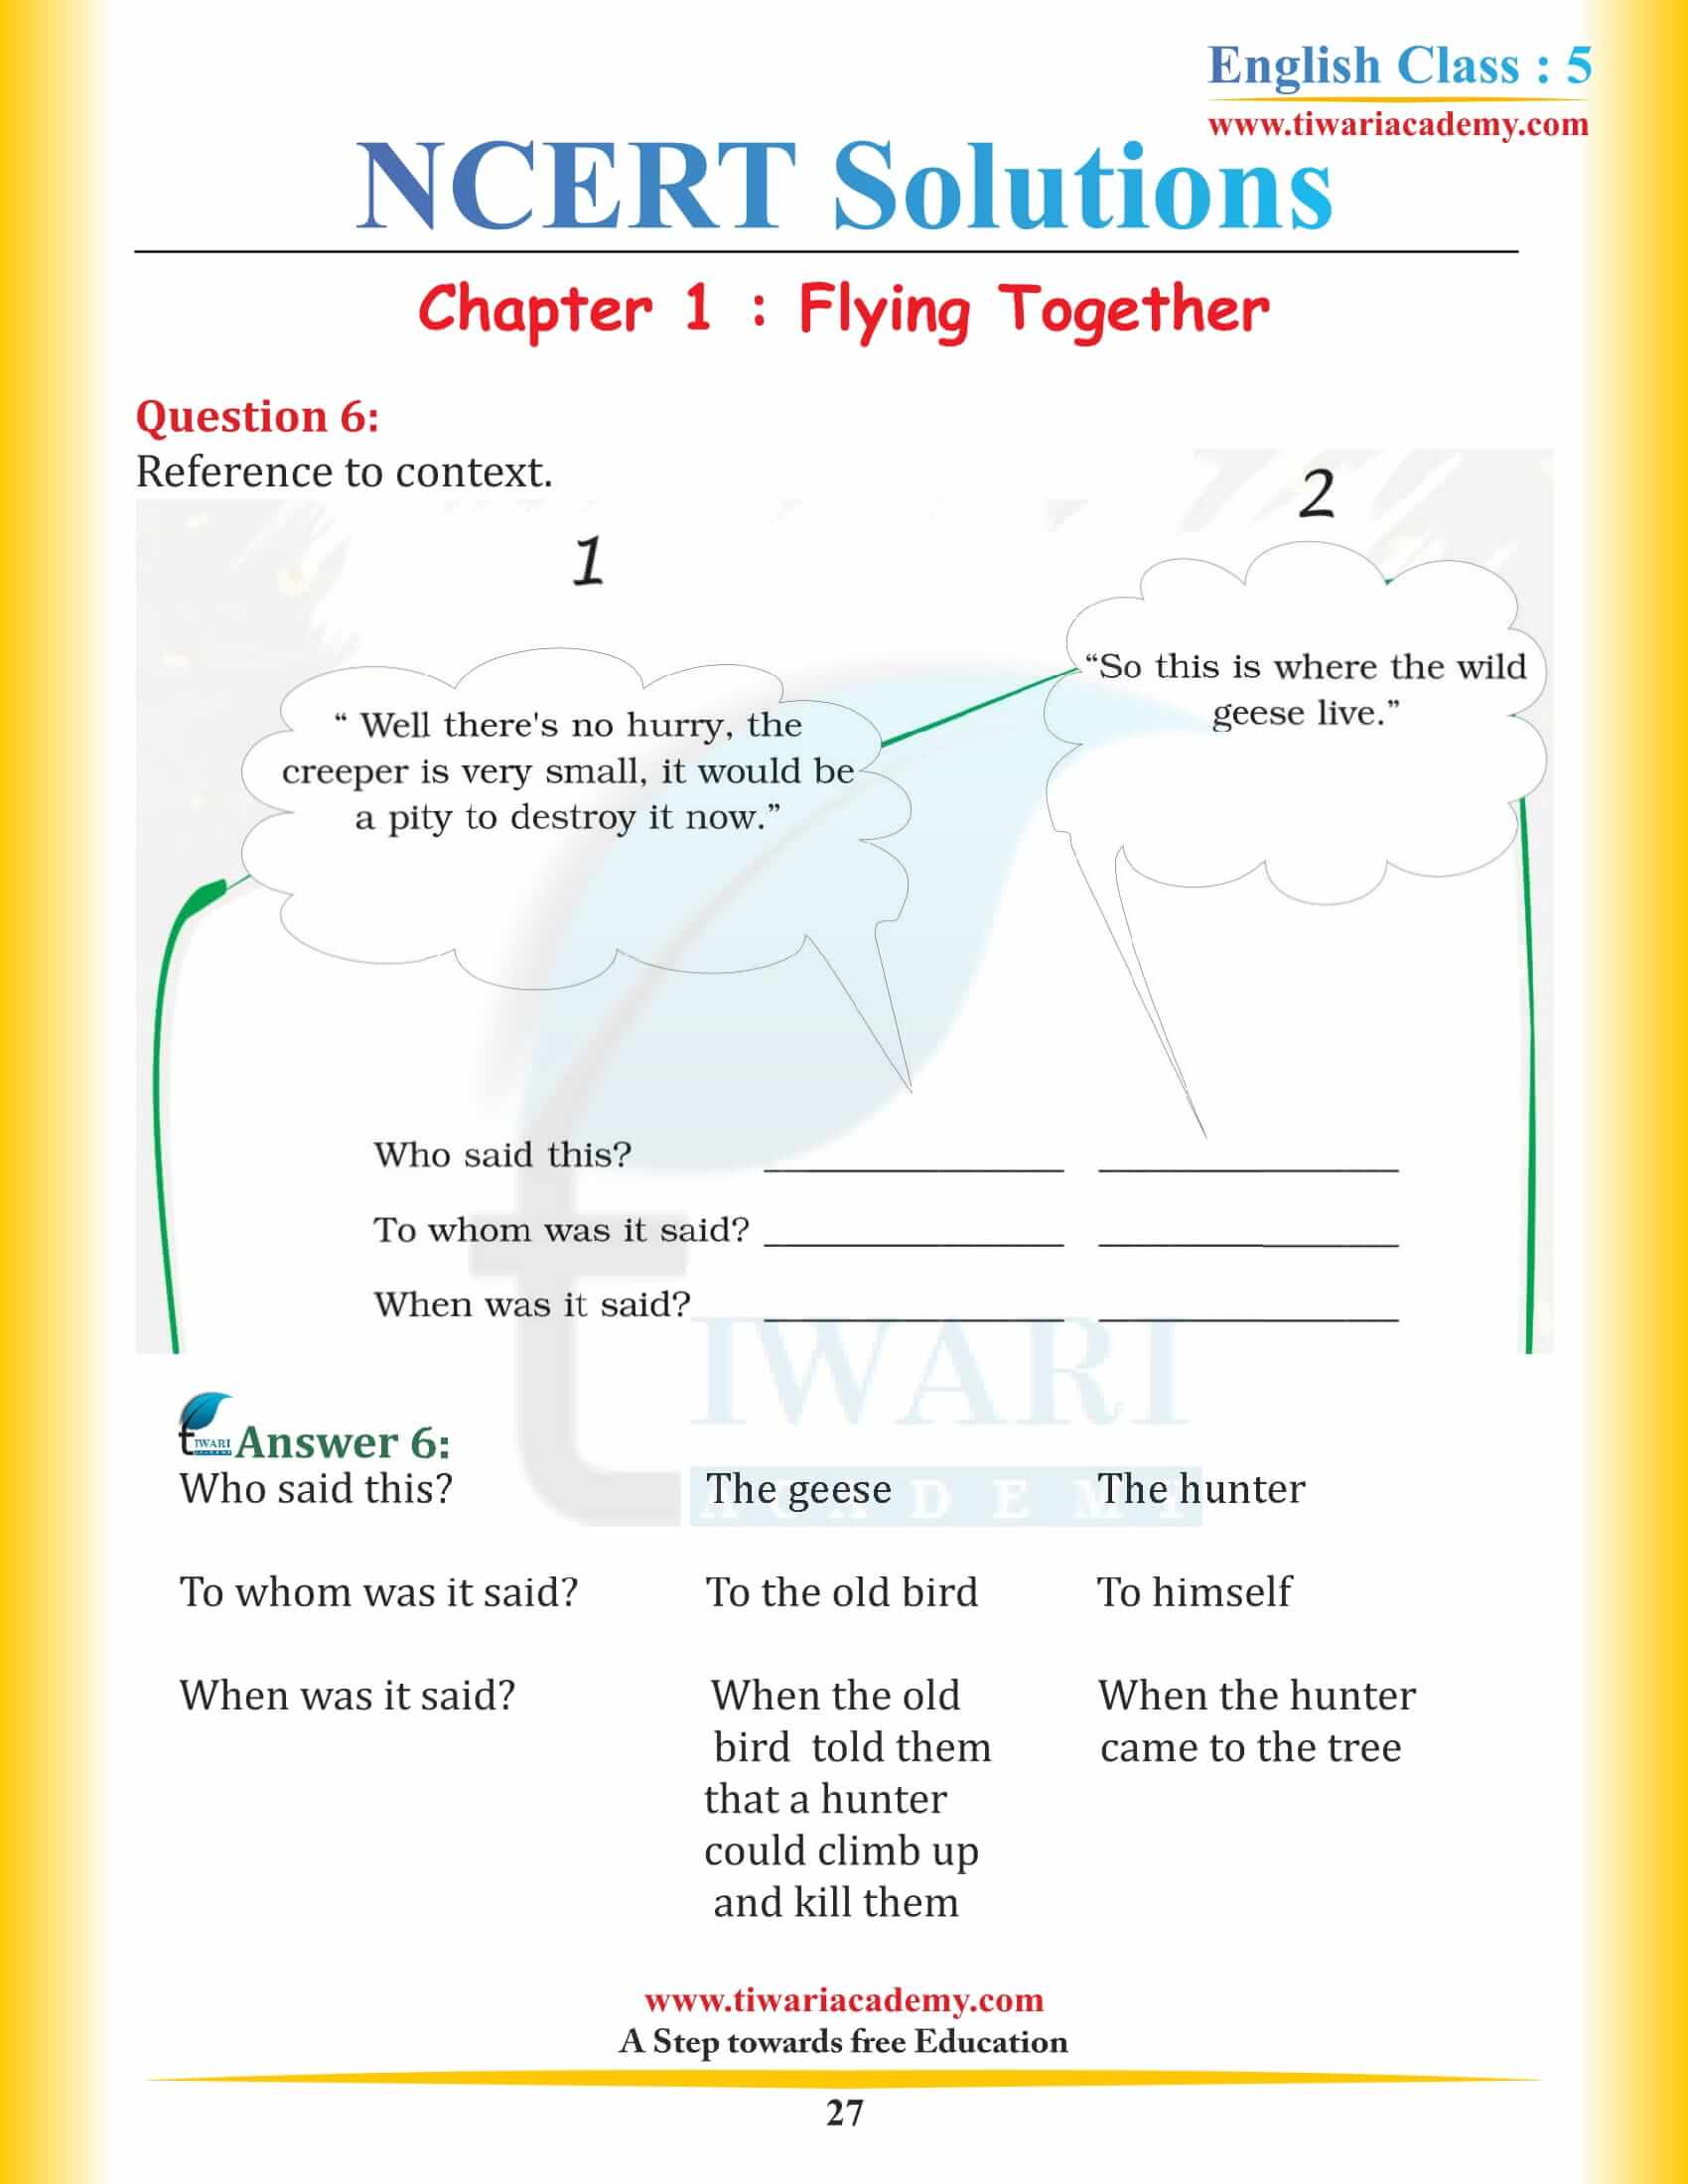 NCERT Solutions Class 5 English Chapter 1 Flying Together free solutions